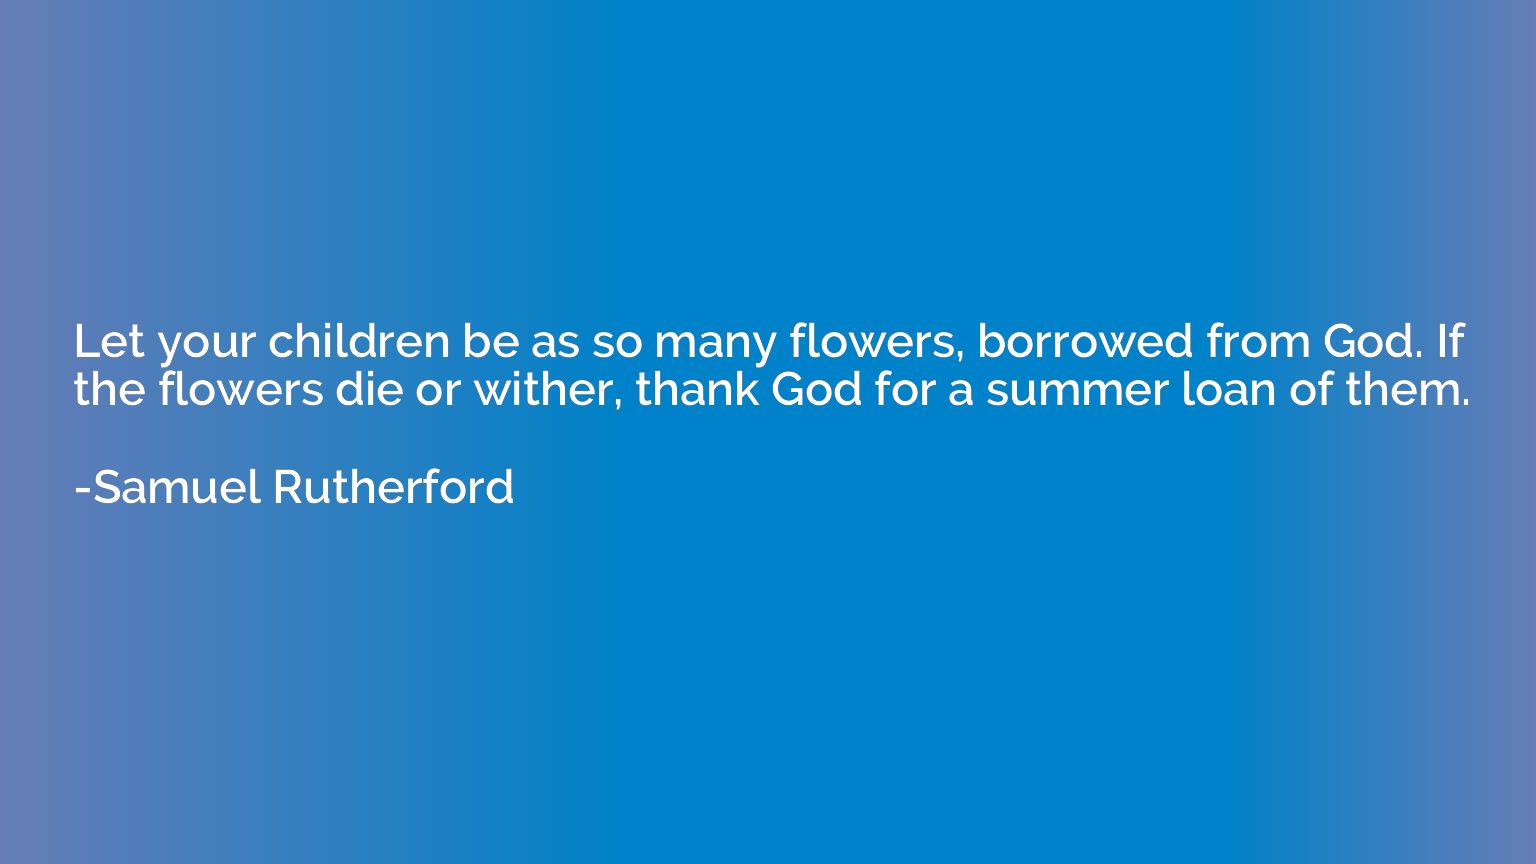 Let your children be as so many flowers, borrowed from God. 